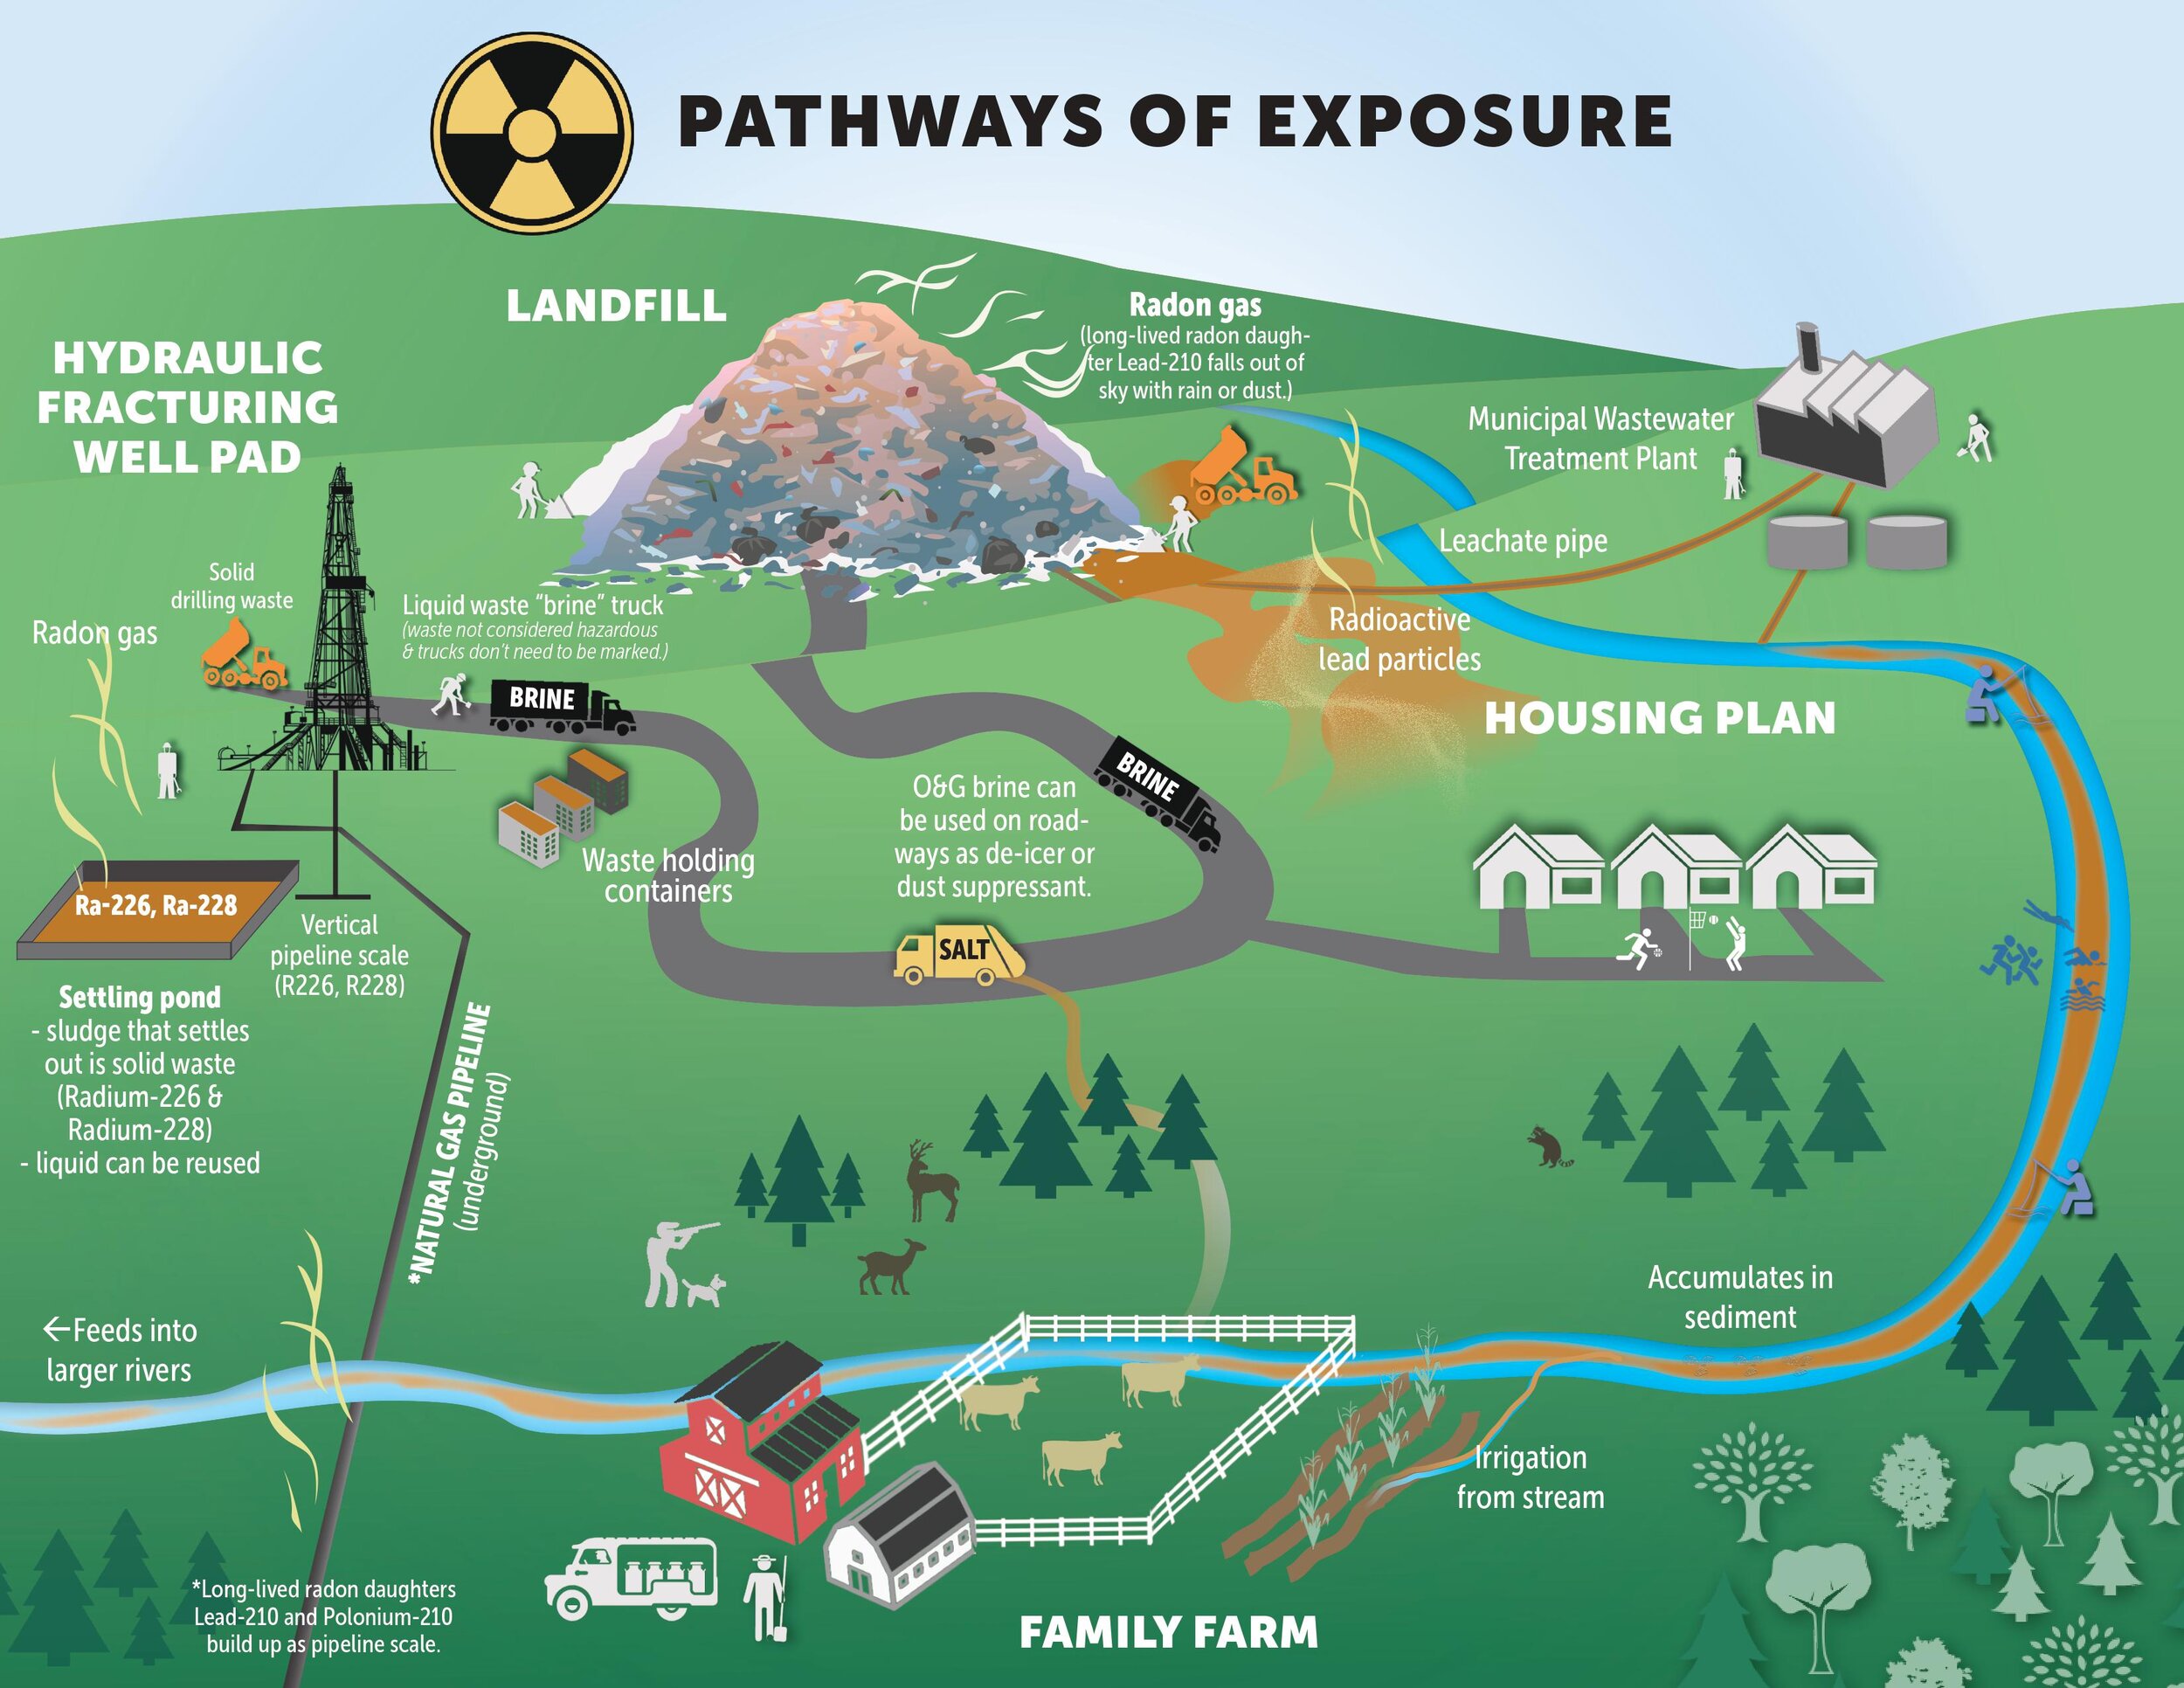 Pathways of Exposure Infographic Find more information on our Radioactive Fracking Resource page